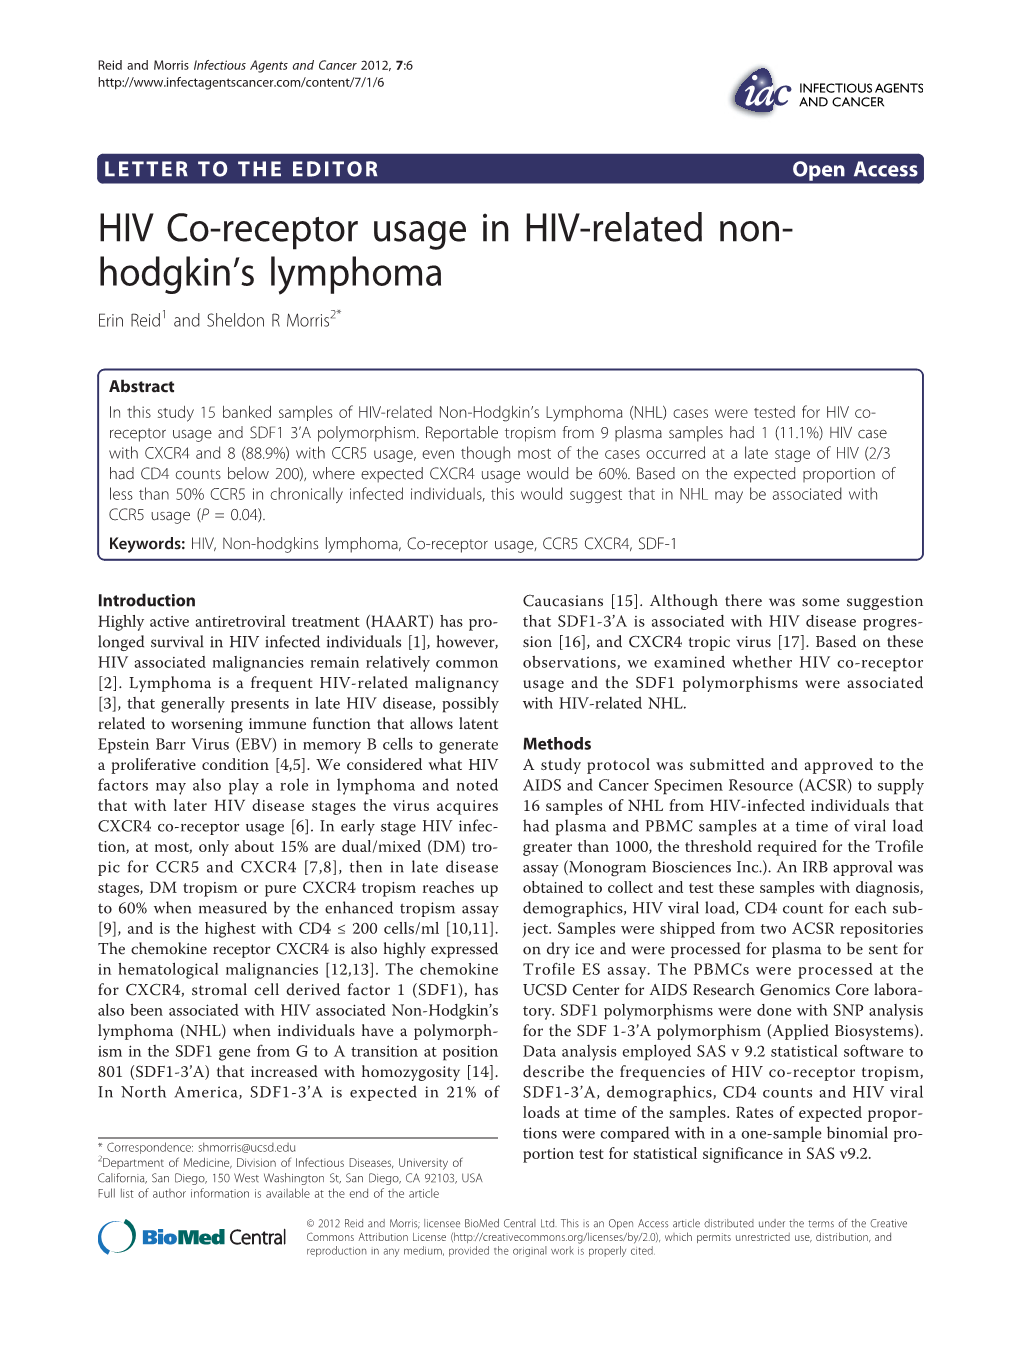 HIV Co-Receptor Usage in HIV-Related Non- Hodgkinls Lymphoma